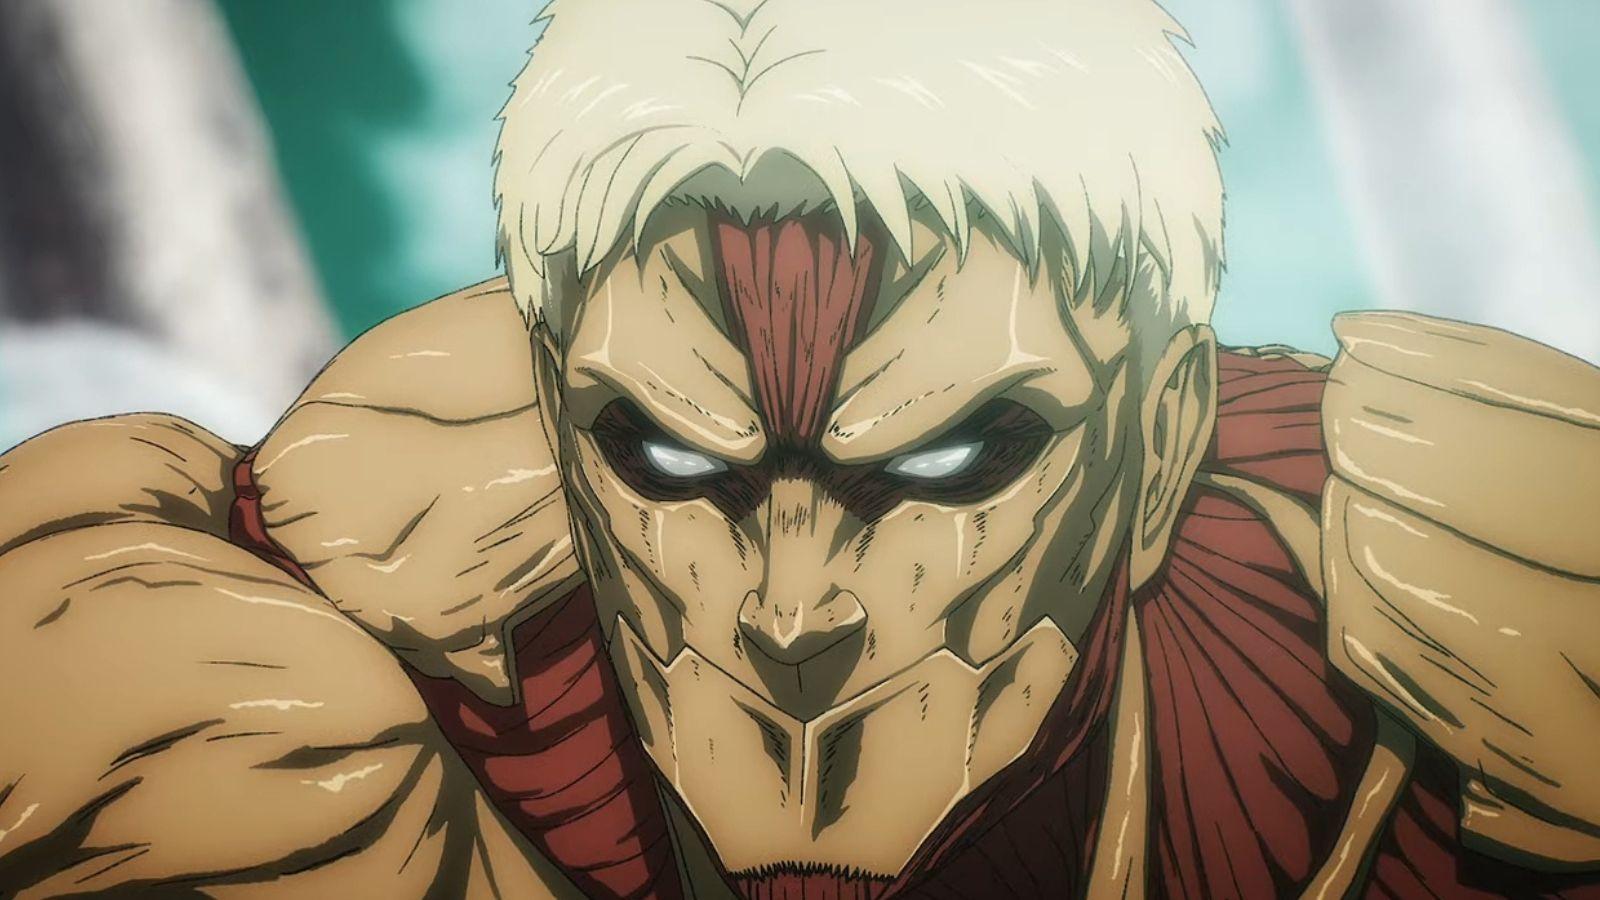 Armored Titan from Attack on Titan